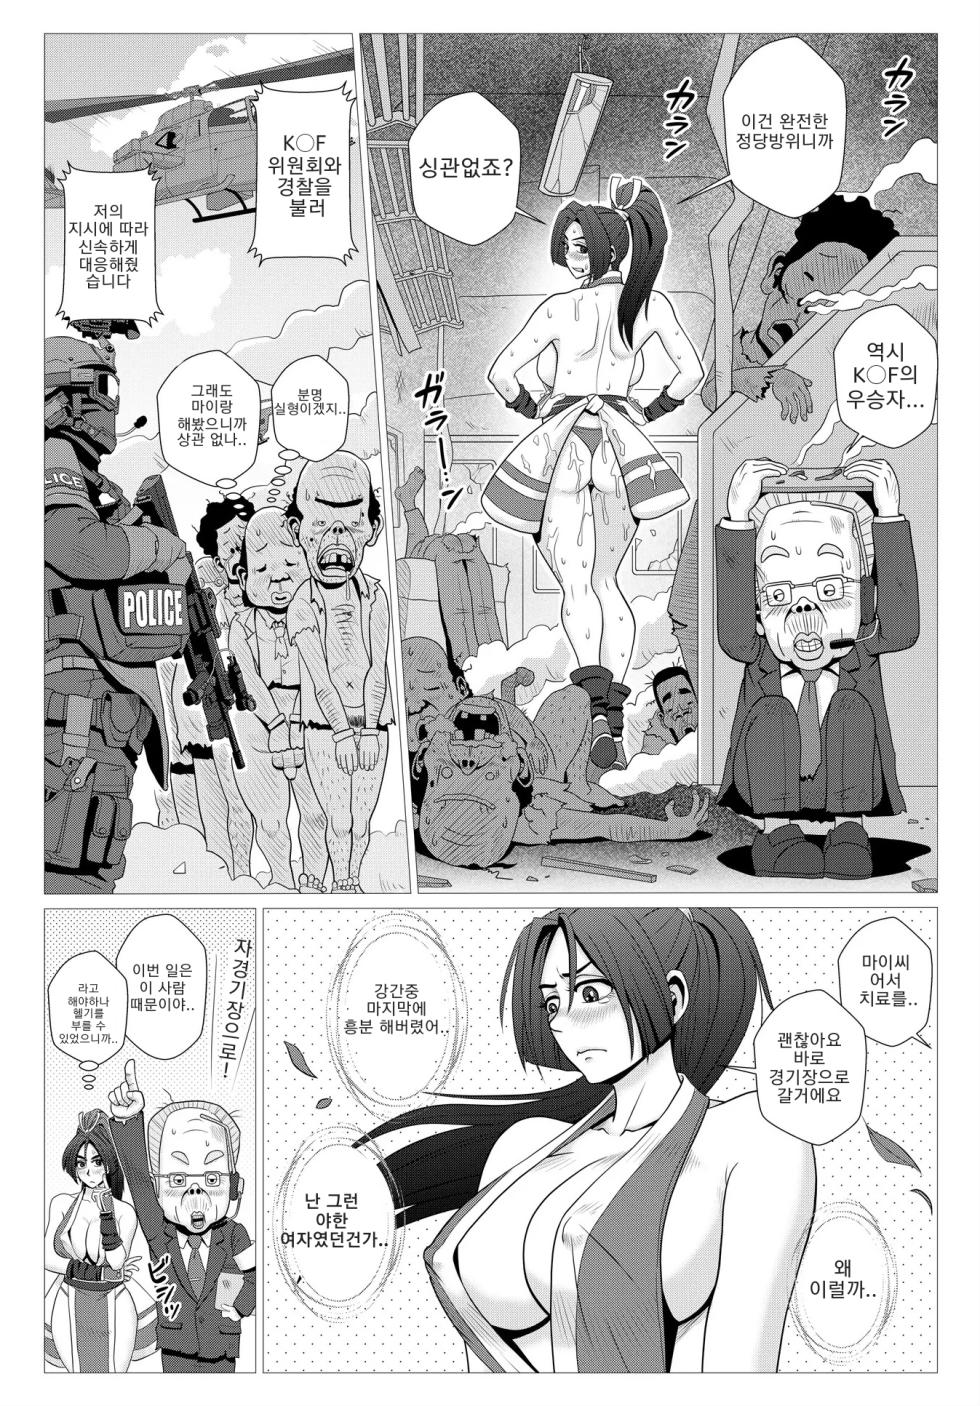 [Falcon115 (Forester)] Maidono no San (The King of Fighters) [Korean] - Page 24